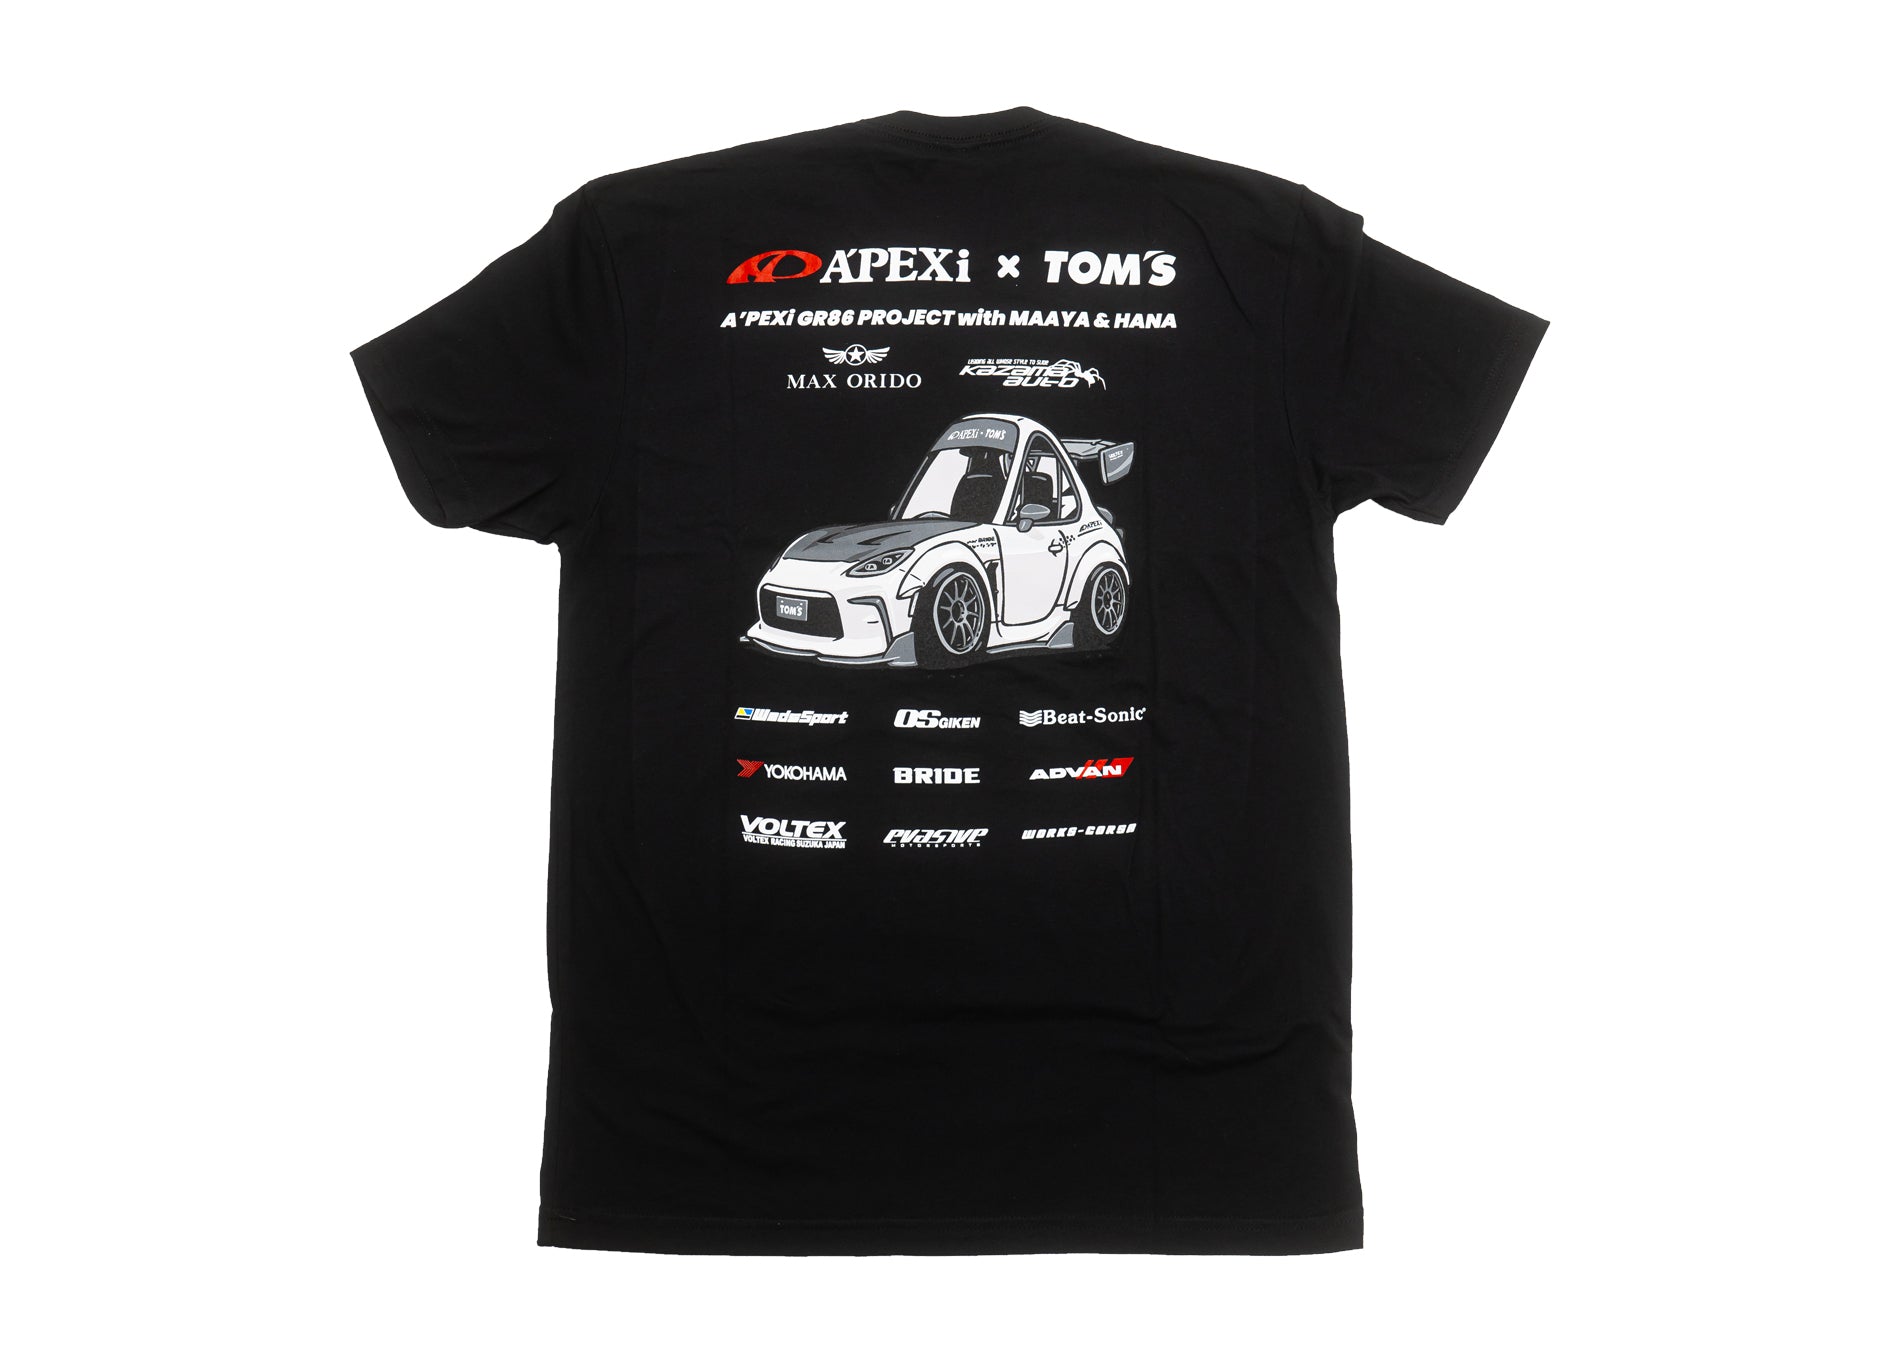 A'PEXi - A'PEXi GR86 Project Team T-Shirt ** LIMITED EDITION **